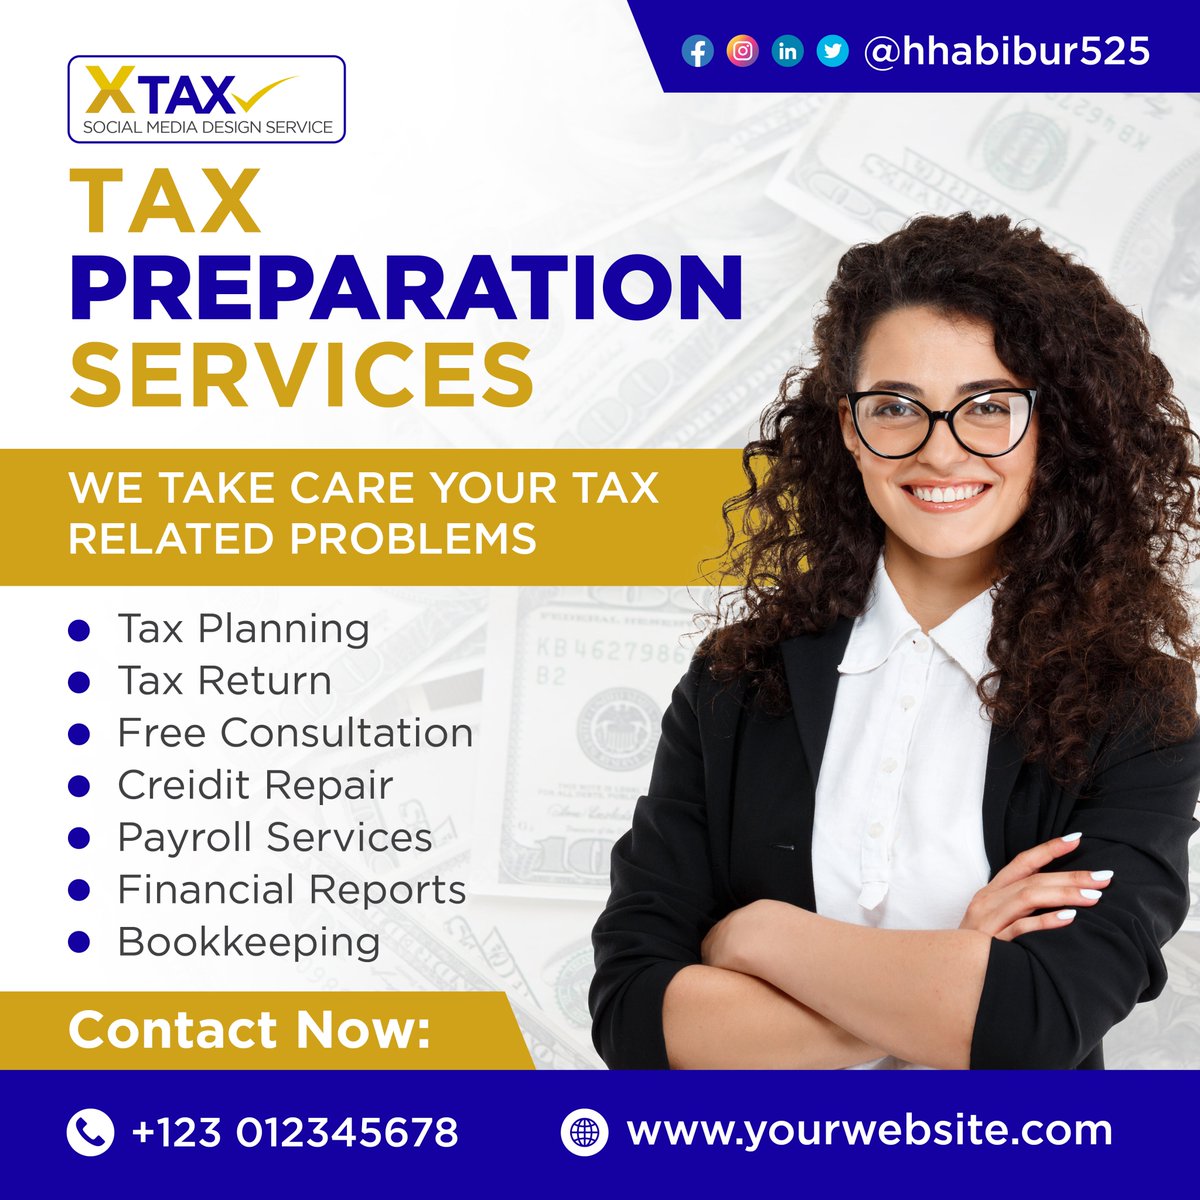 Hire an expert Graphic designer. #hhabibur525 I'll provide the all social media post design, business flyer, and print design solutions . #socialmedia #tax #taxreturn #bookkeeping #taxseason #taxlady #financial #creative #business #graphicdesigner #credit #business #payroll